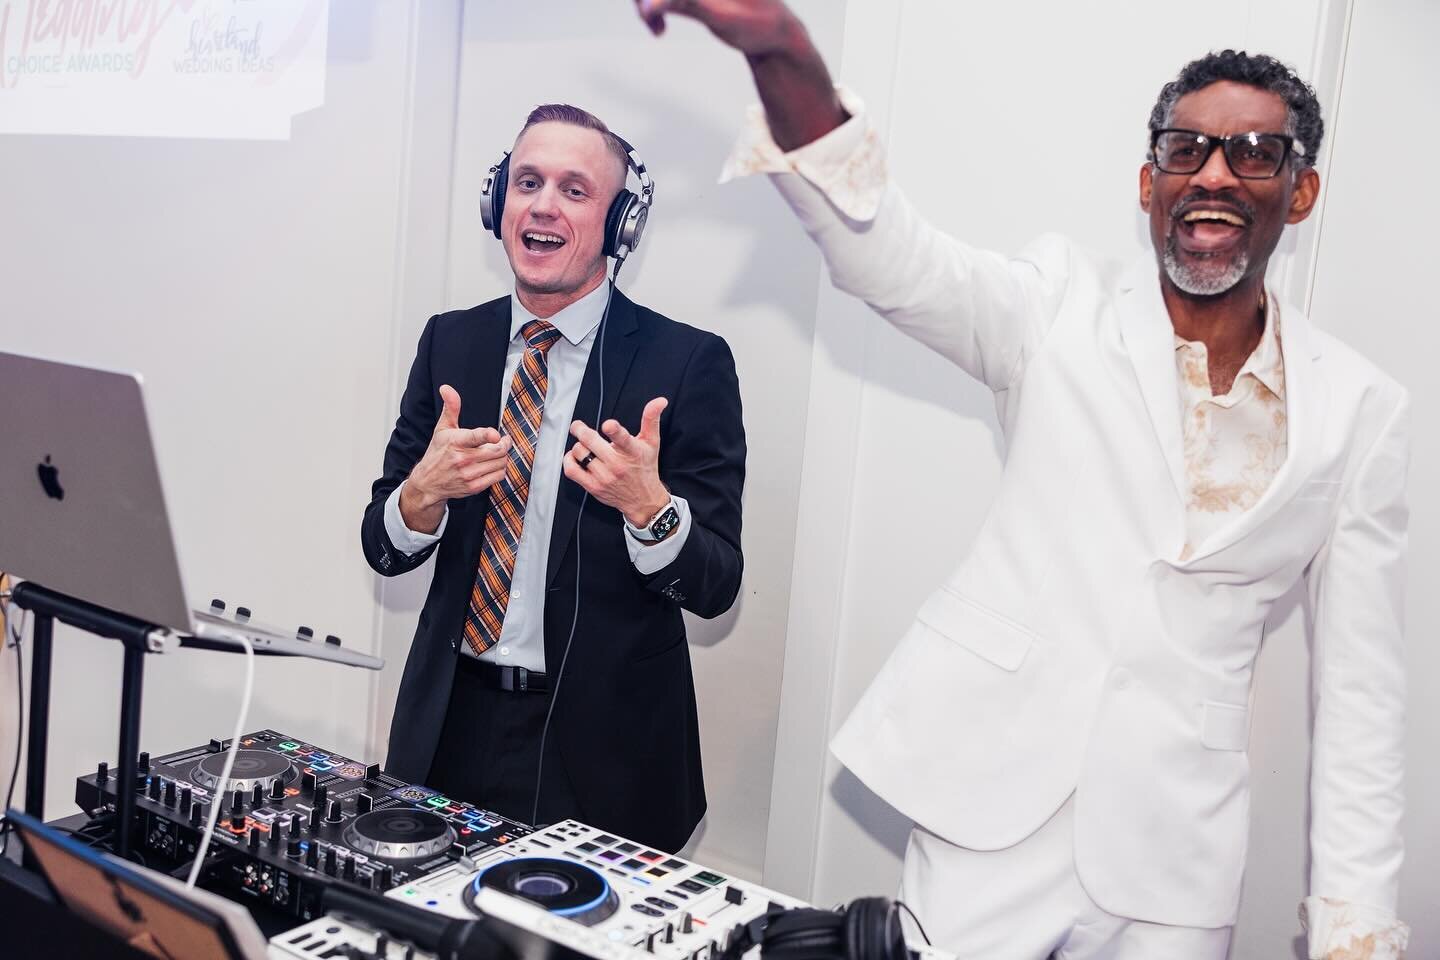 Thank you @dj.das.ent for inviting me to DJ the @weddingchoiceawards this year! It was such a great time and being able to DJ side by side with you was a blessing! #StandingOnBusiness #DesMoinesweddingdj 📸: @leahriedphotography